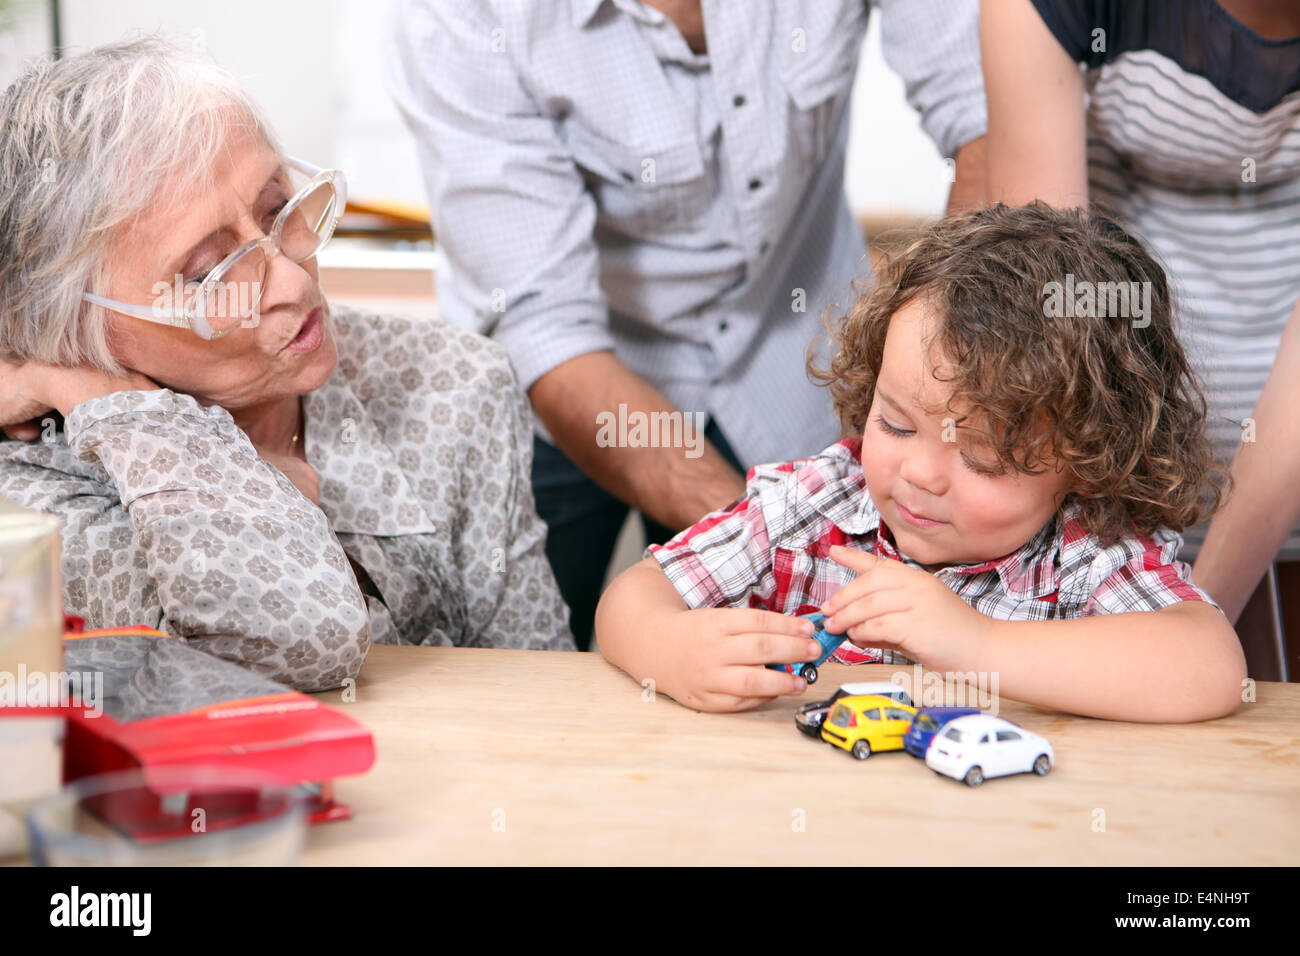 Little boy playing with toy cars Stock Photo